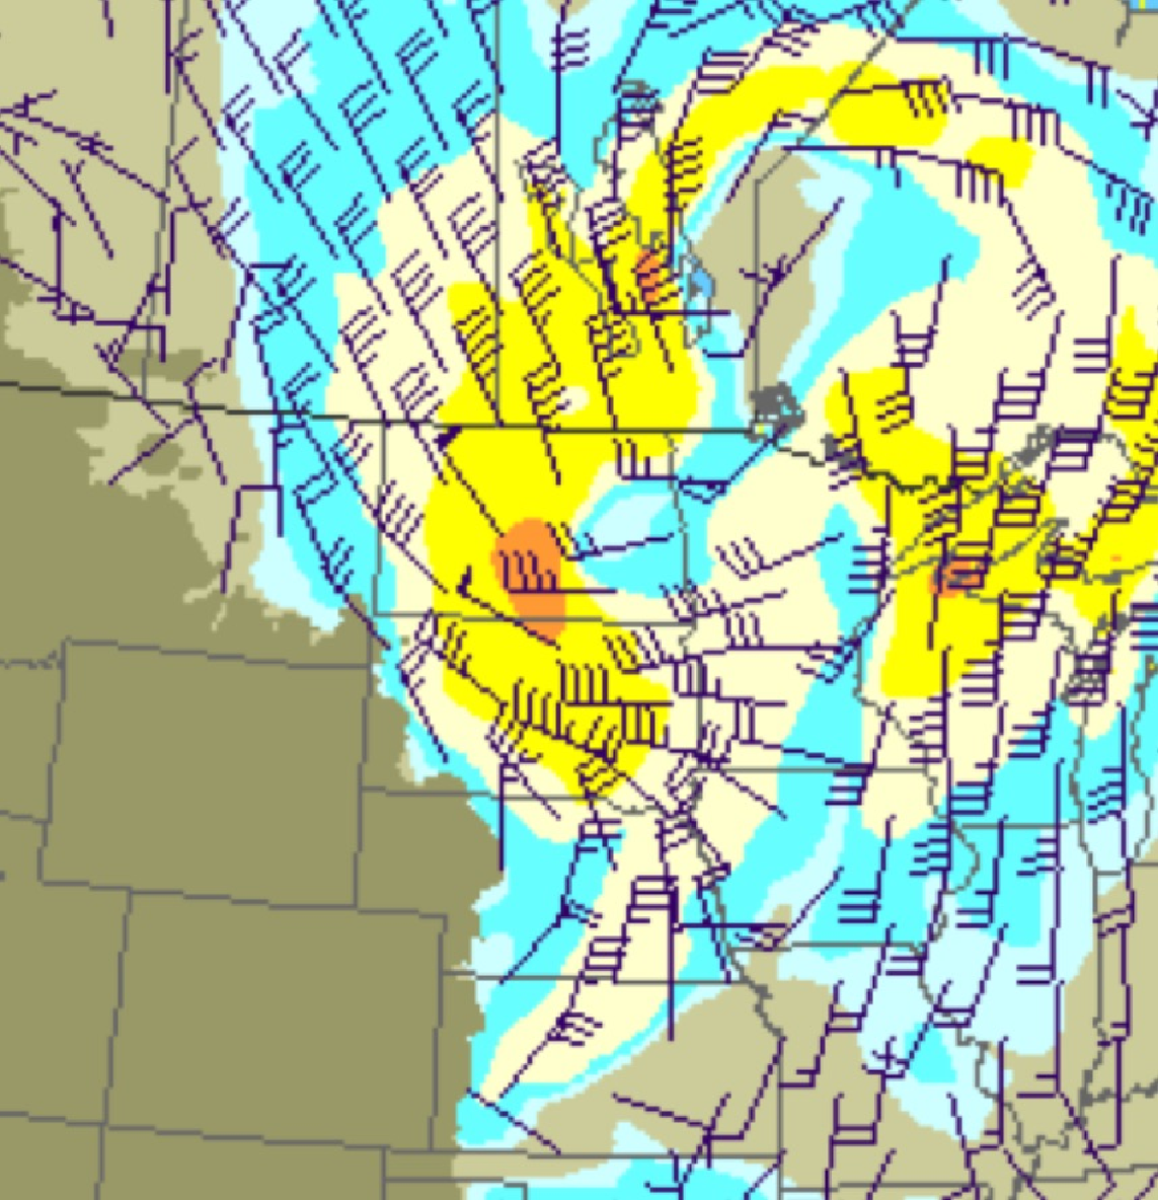 Projected surface winds for our day in the air.